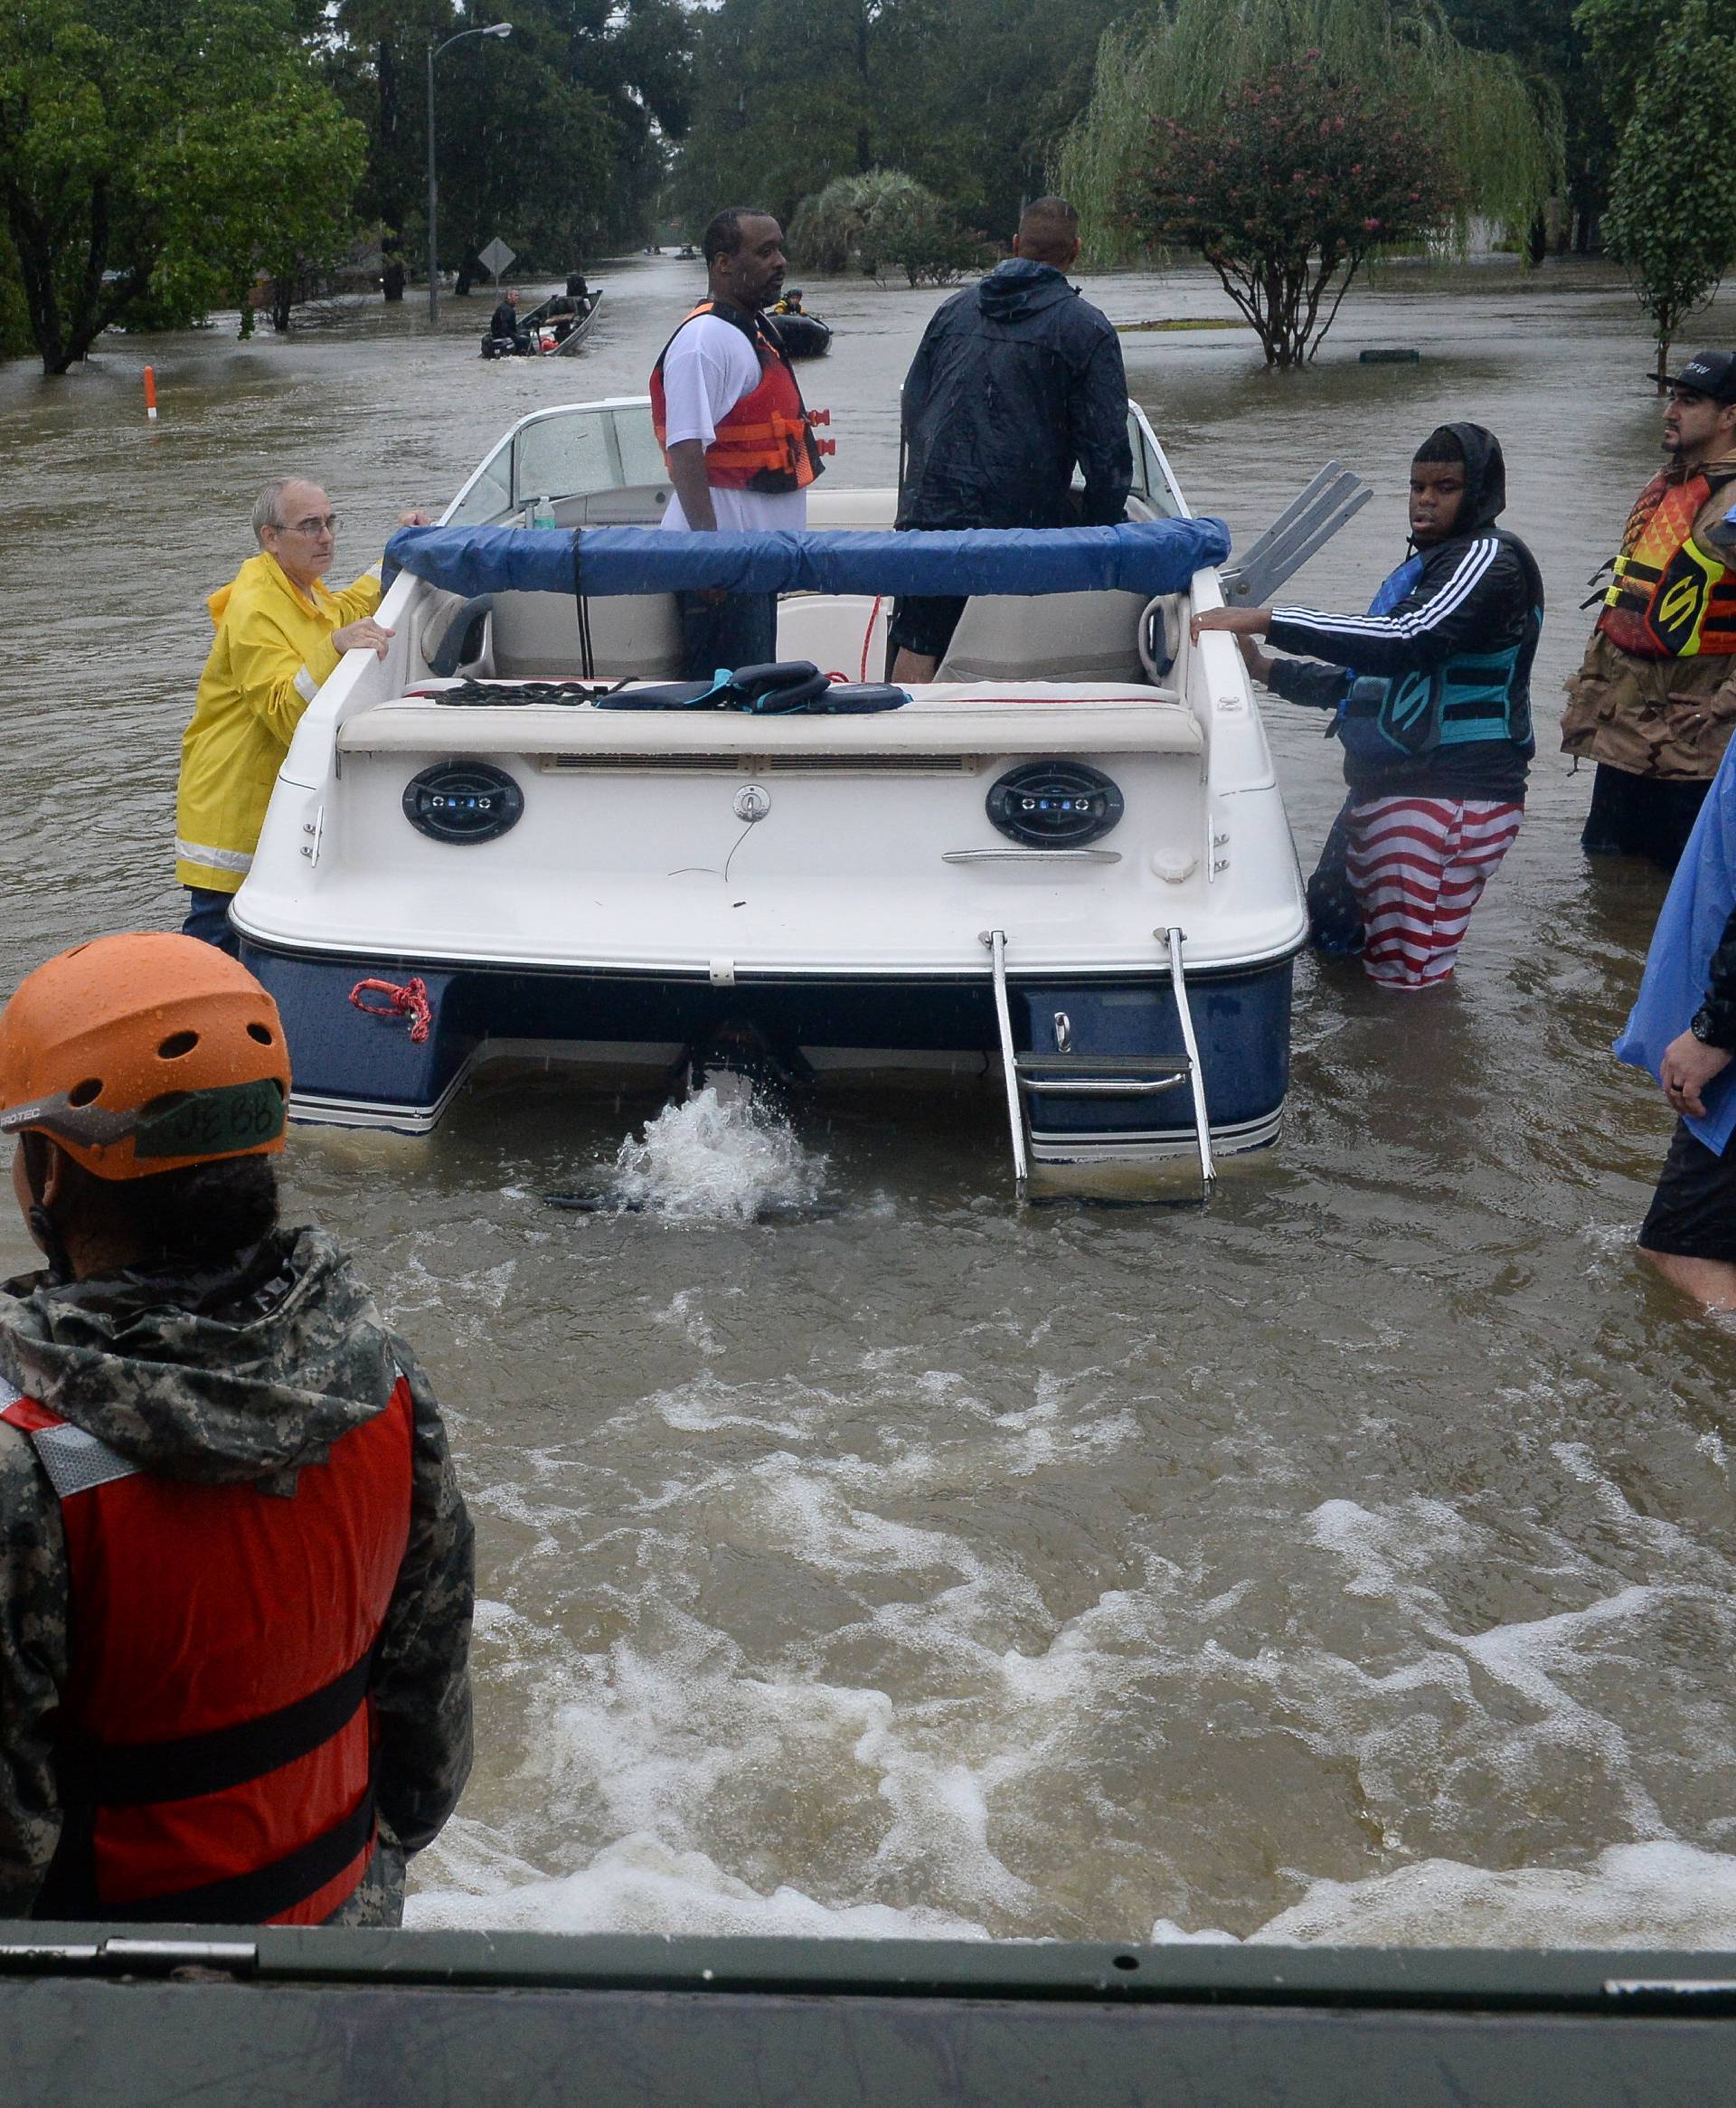 Texas National Guardsmen work alongside first responders to rescue local citizens from severe flooding in Cypress Creek